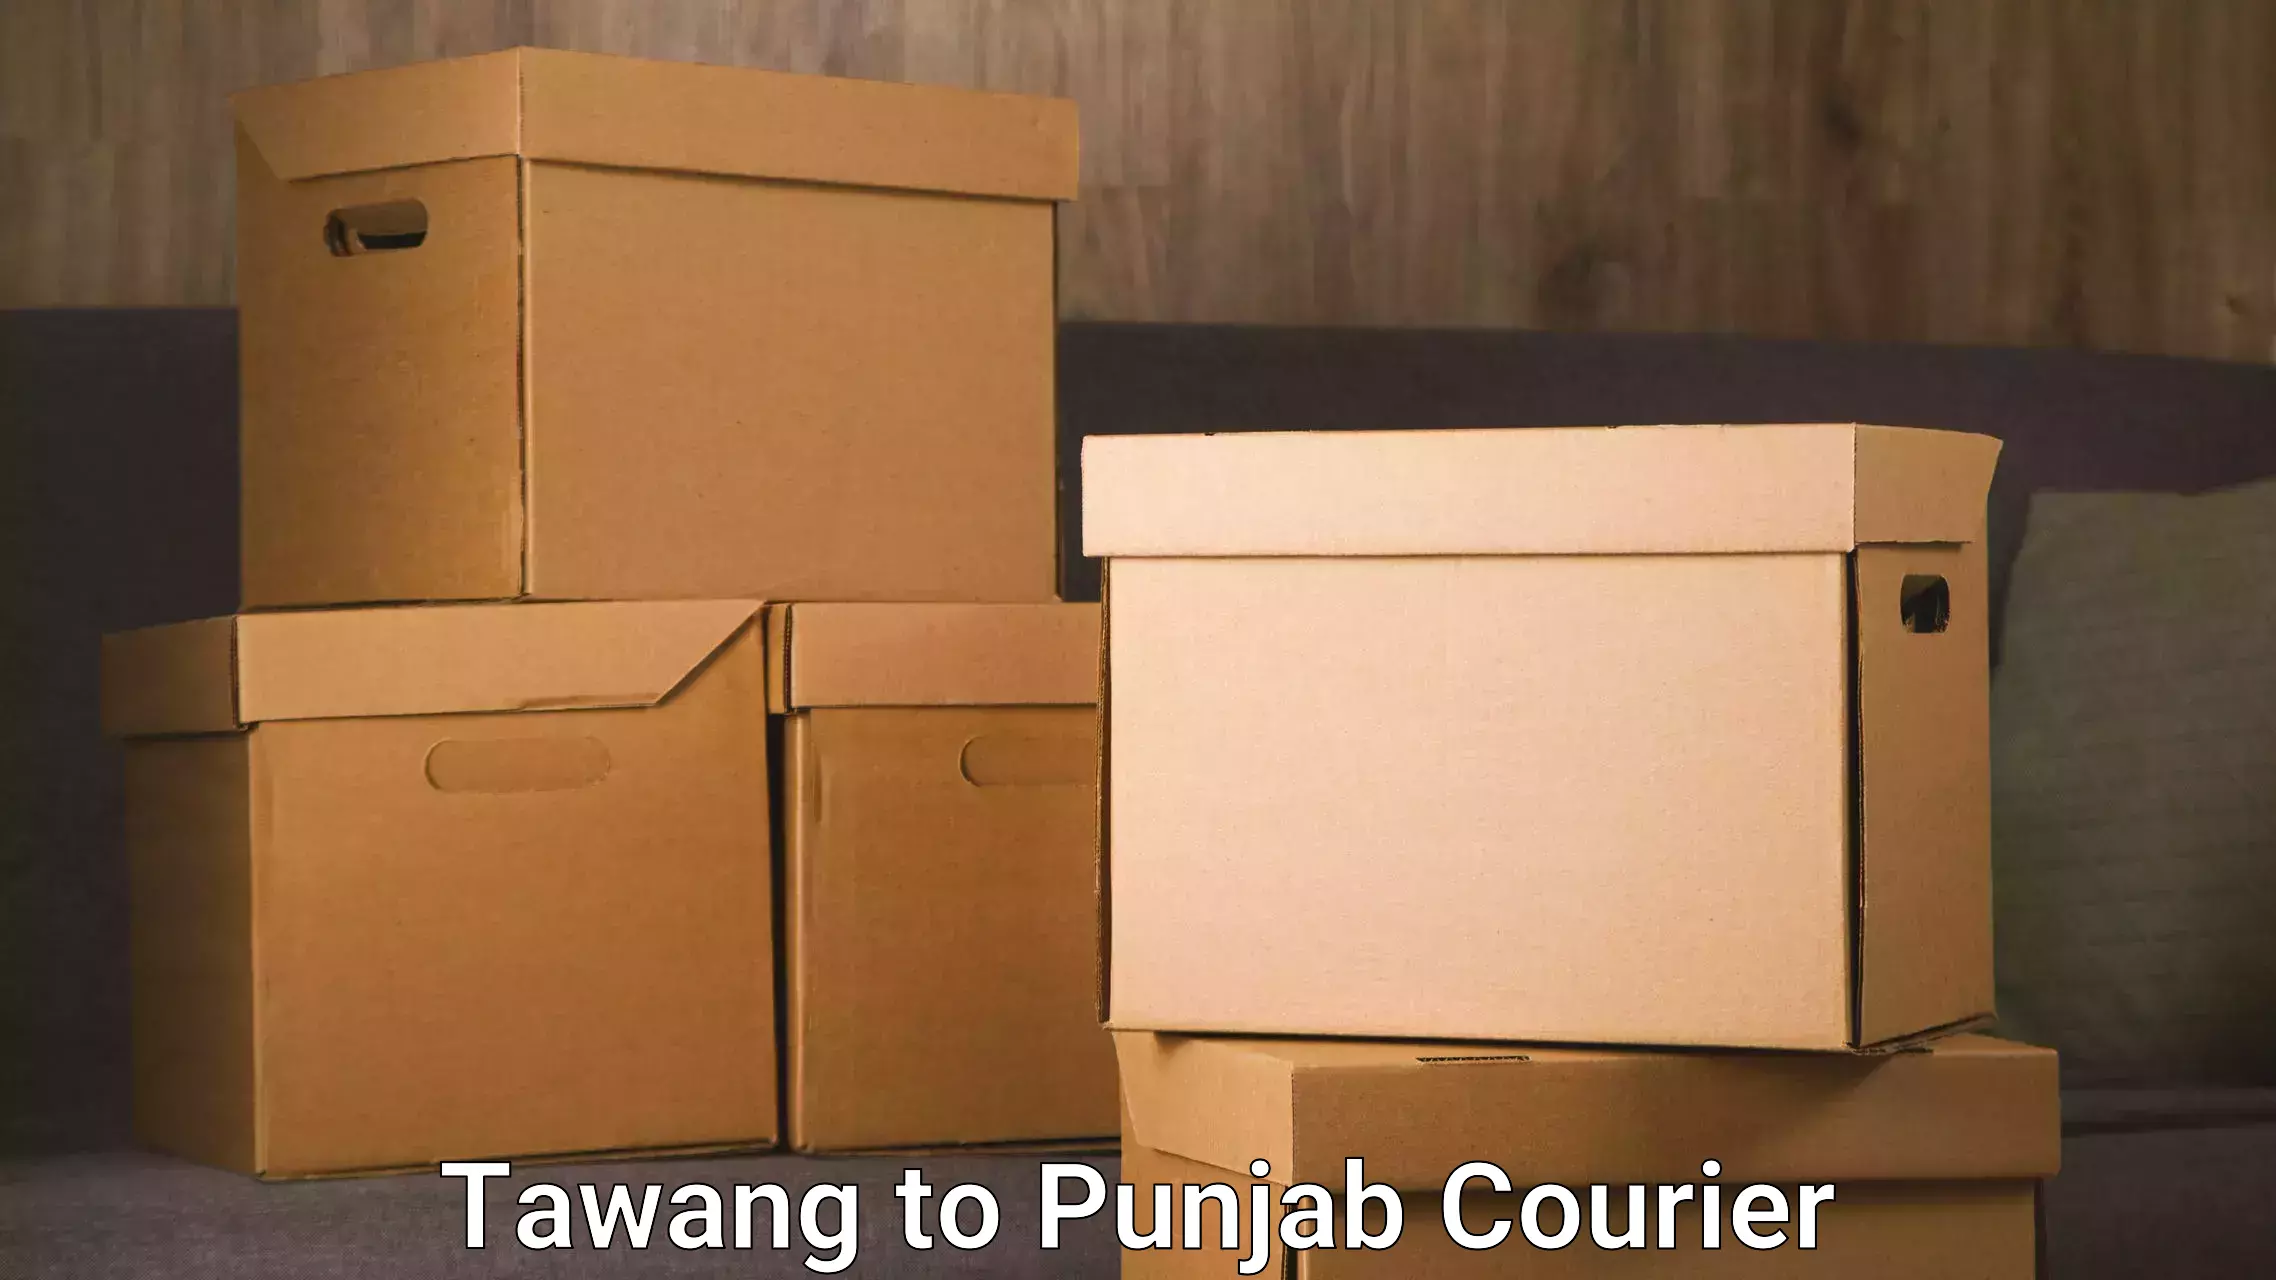 Cash on delivery service Tawang to Punjab